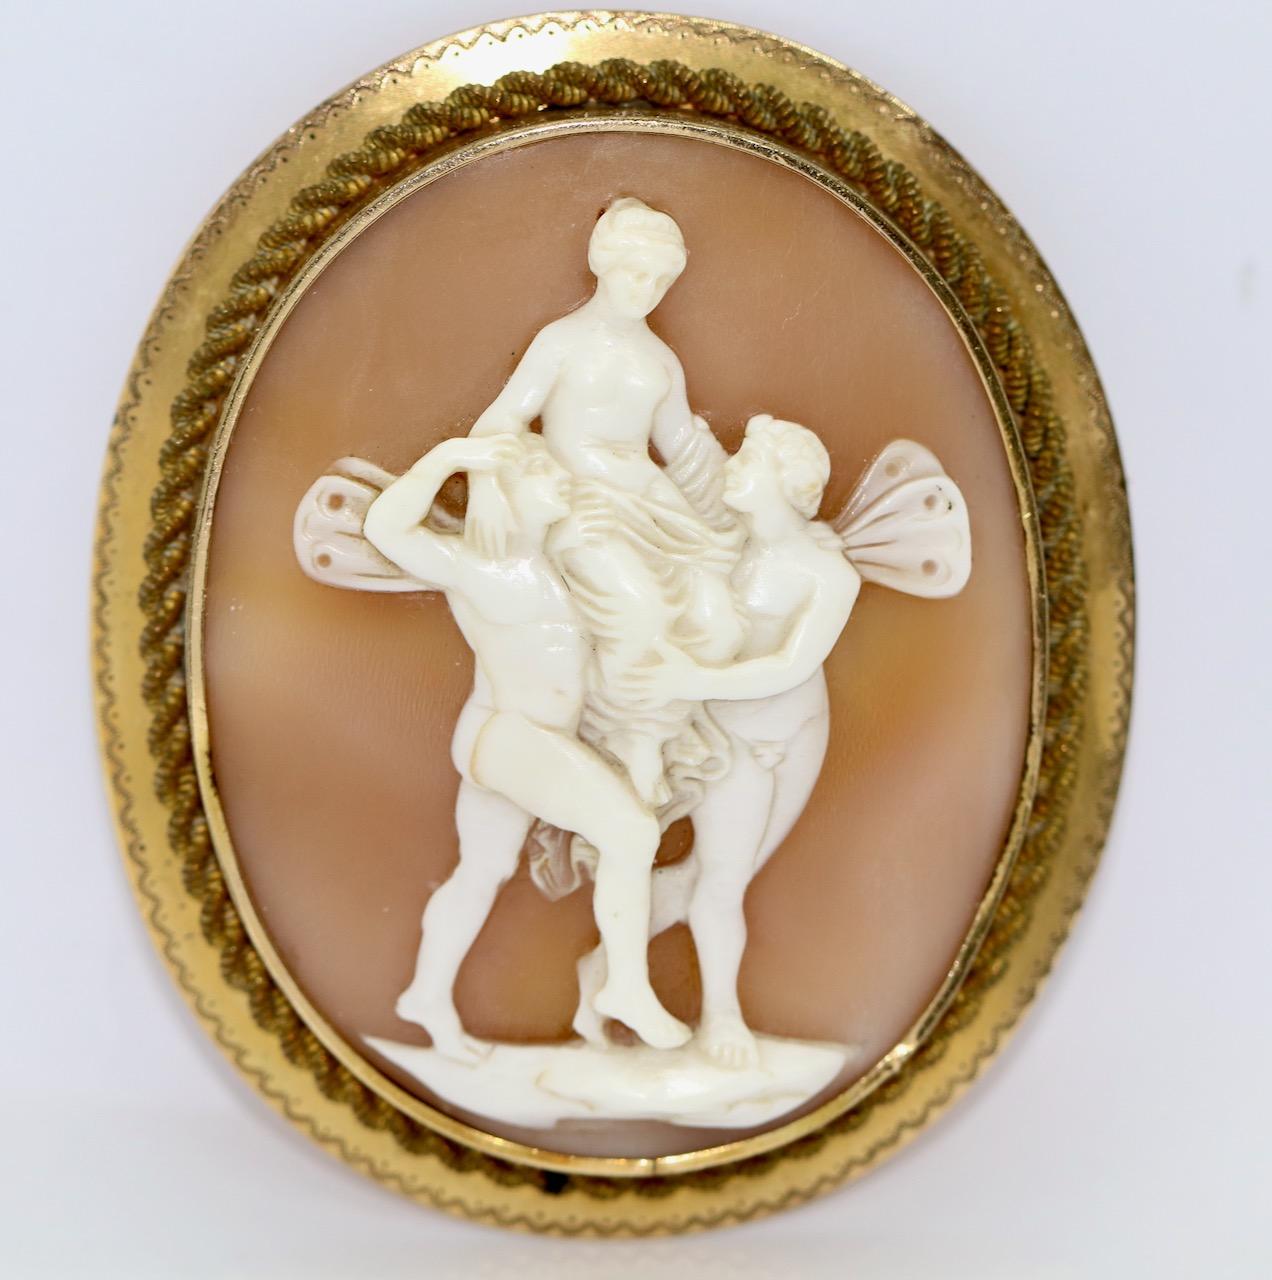 Beautiful Antique, Large Cameo Brooch.

Romantic scene. Possibly gilded.
Very fine and detailed carving.
Cameo is signed on the back.